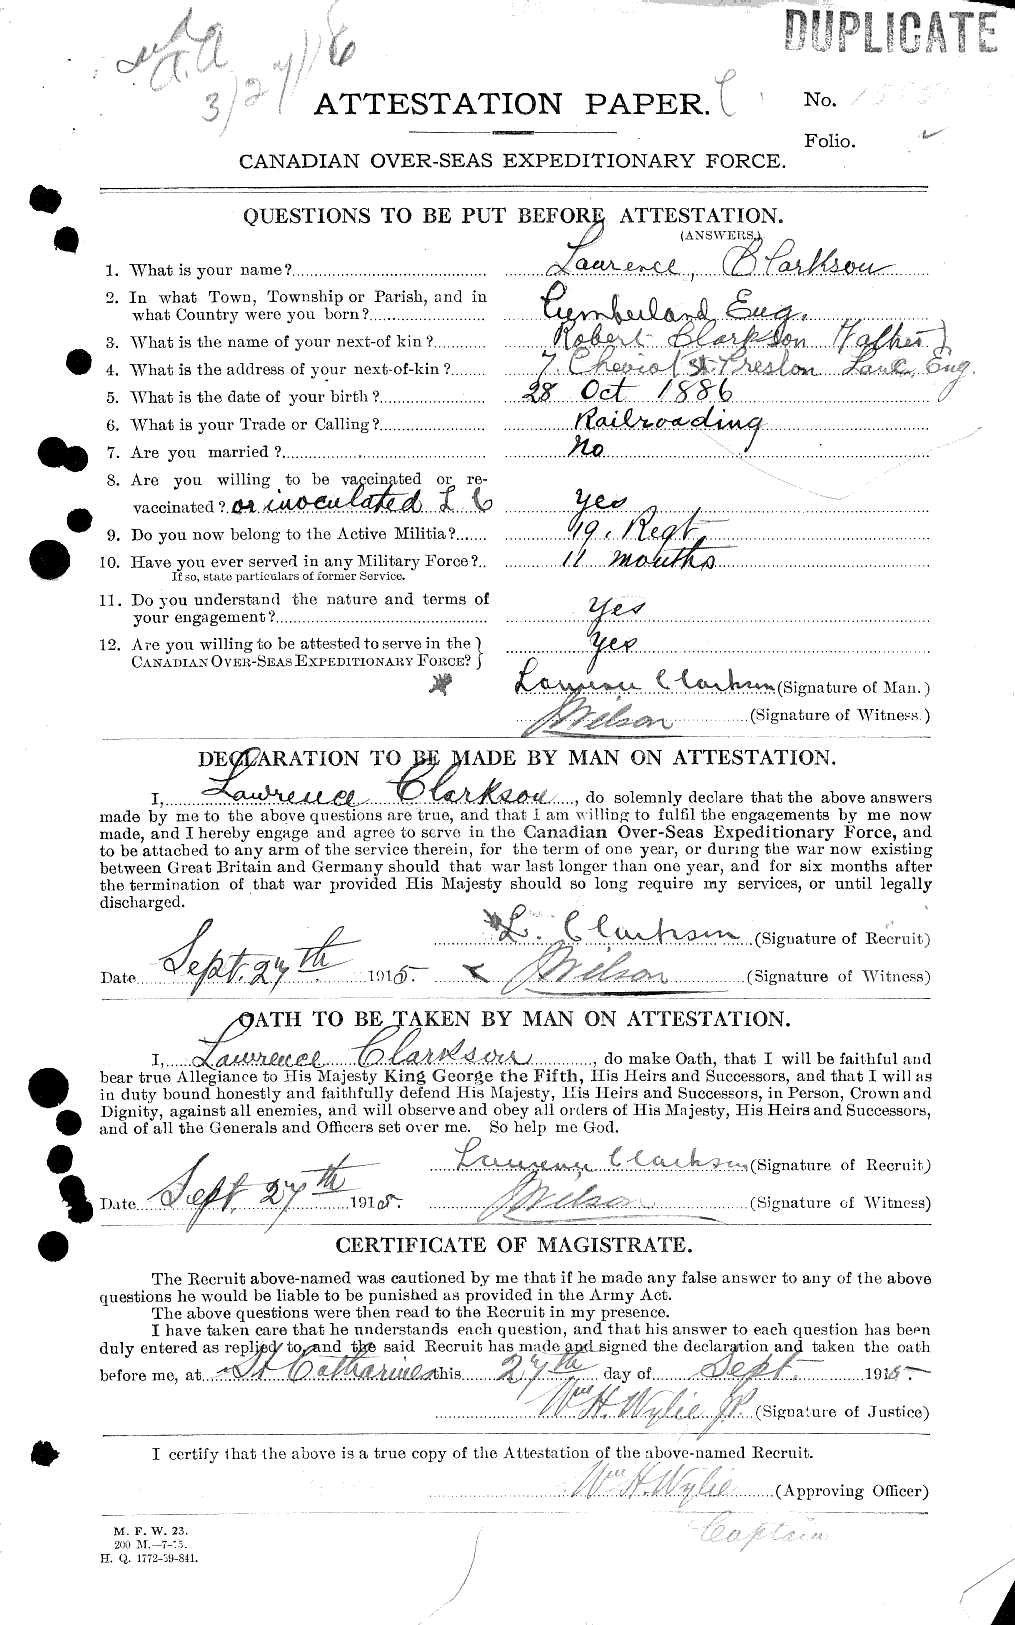 Personnel Records of the First World War - CEF 021460a